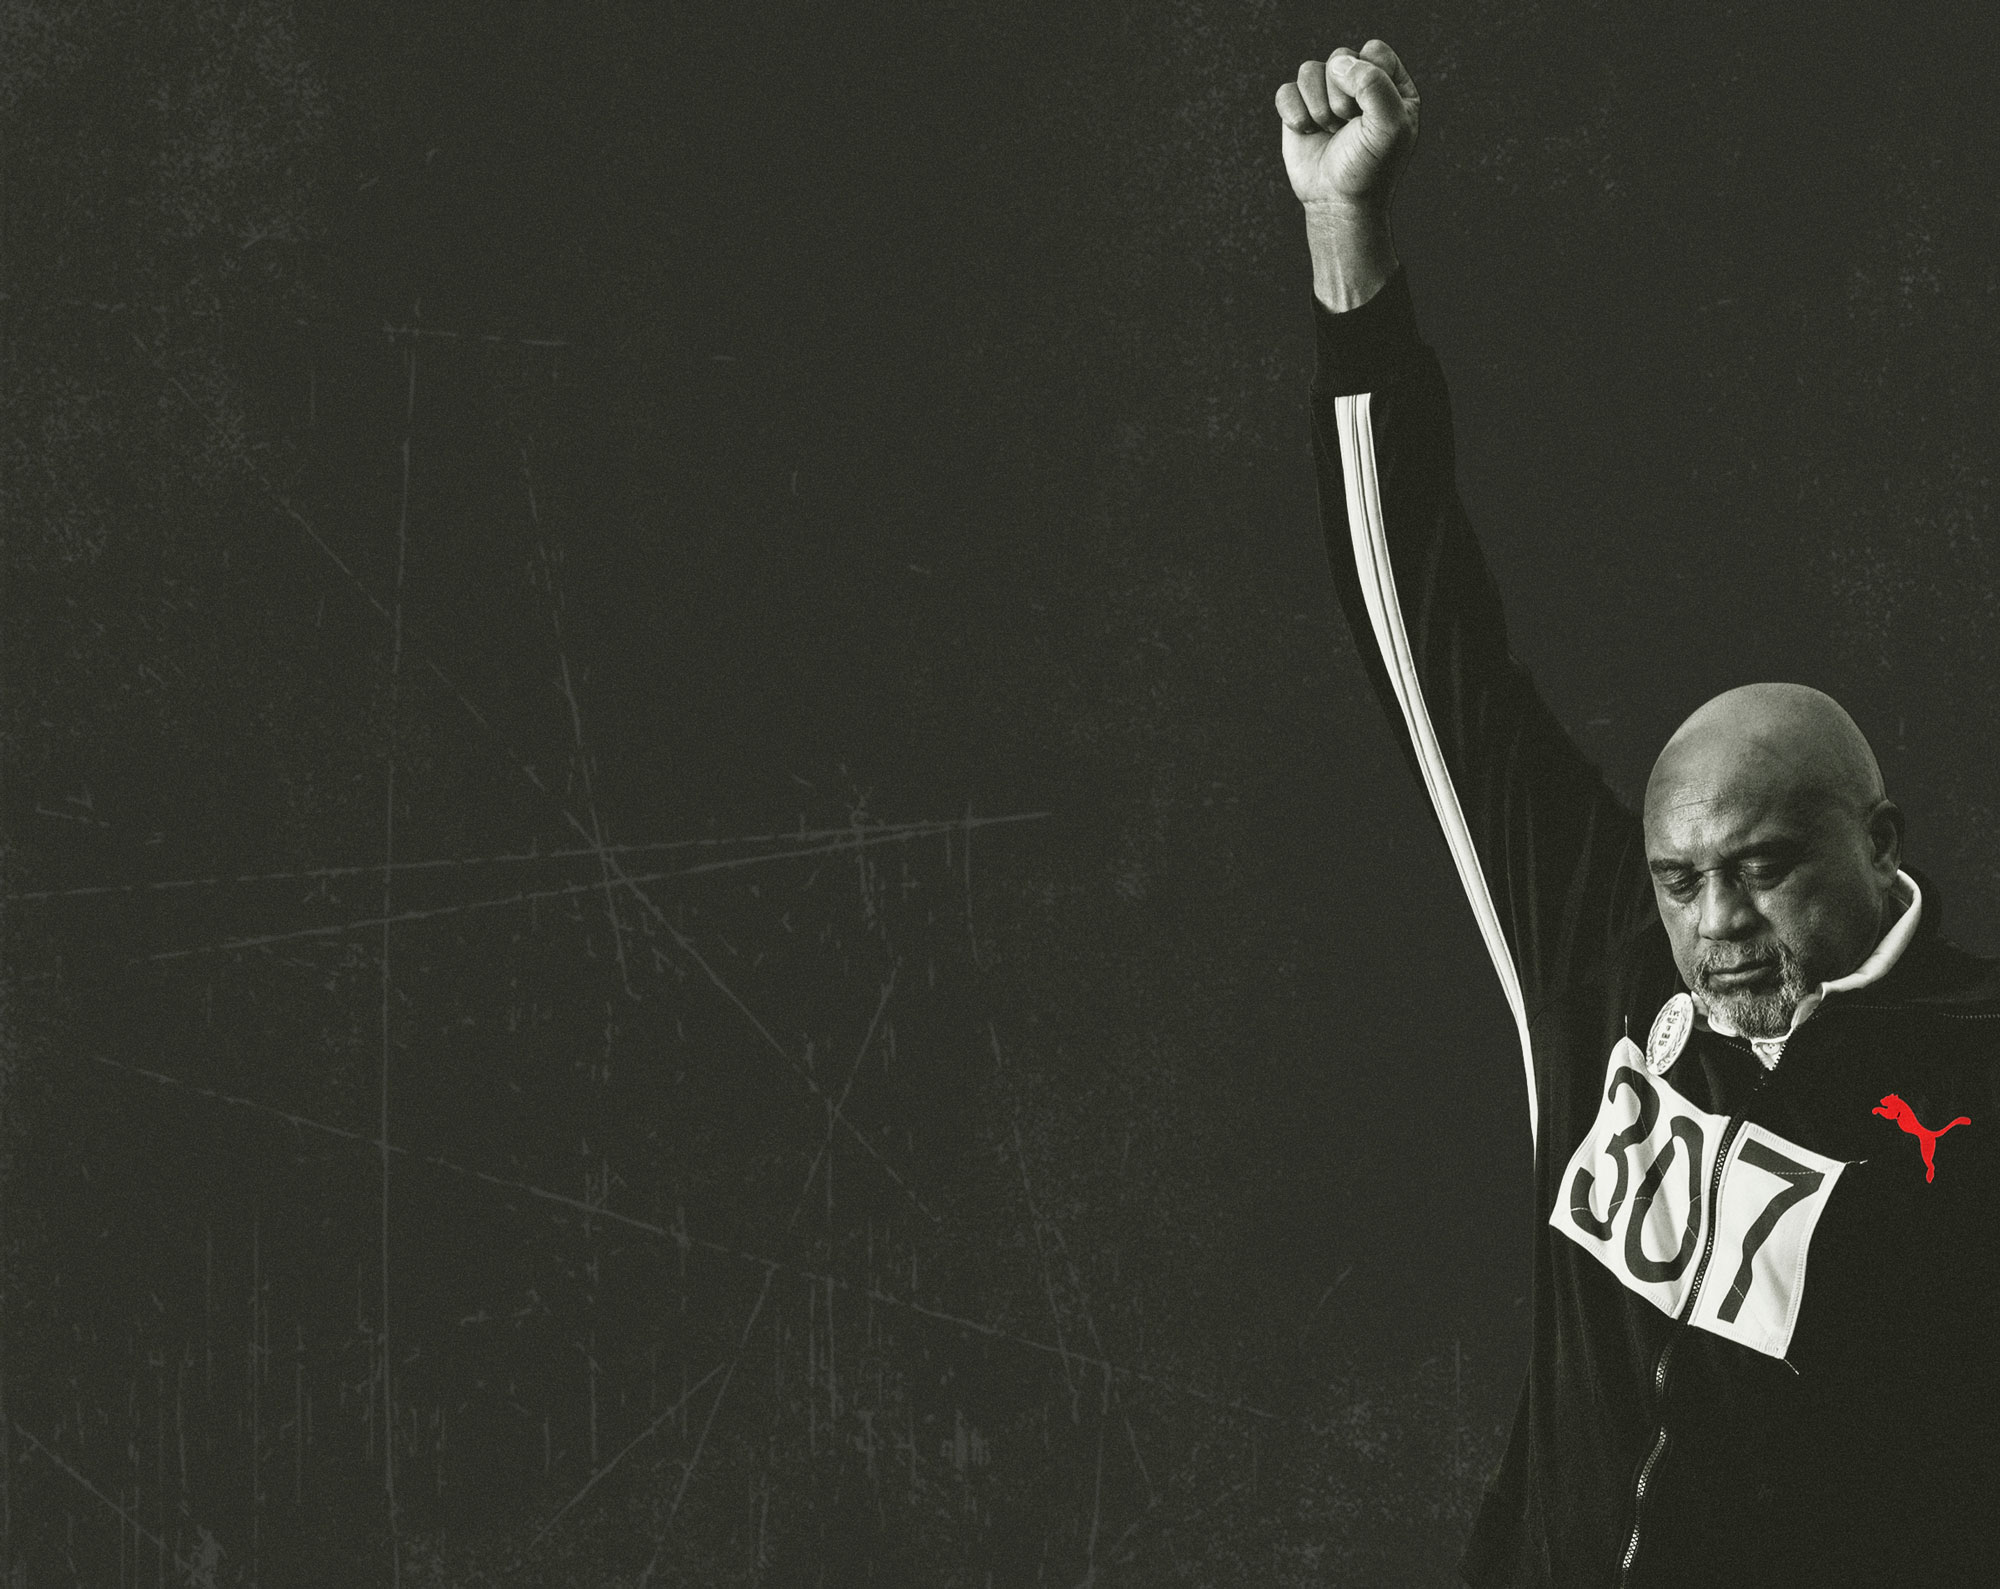 Tommie Smith with a fist raised in protest